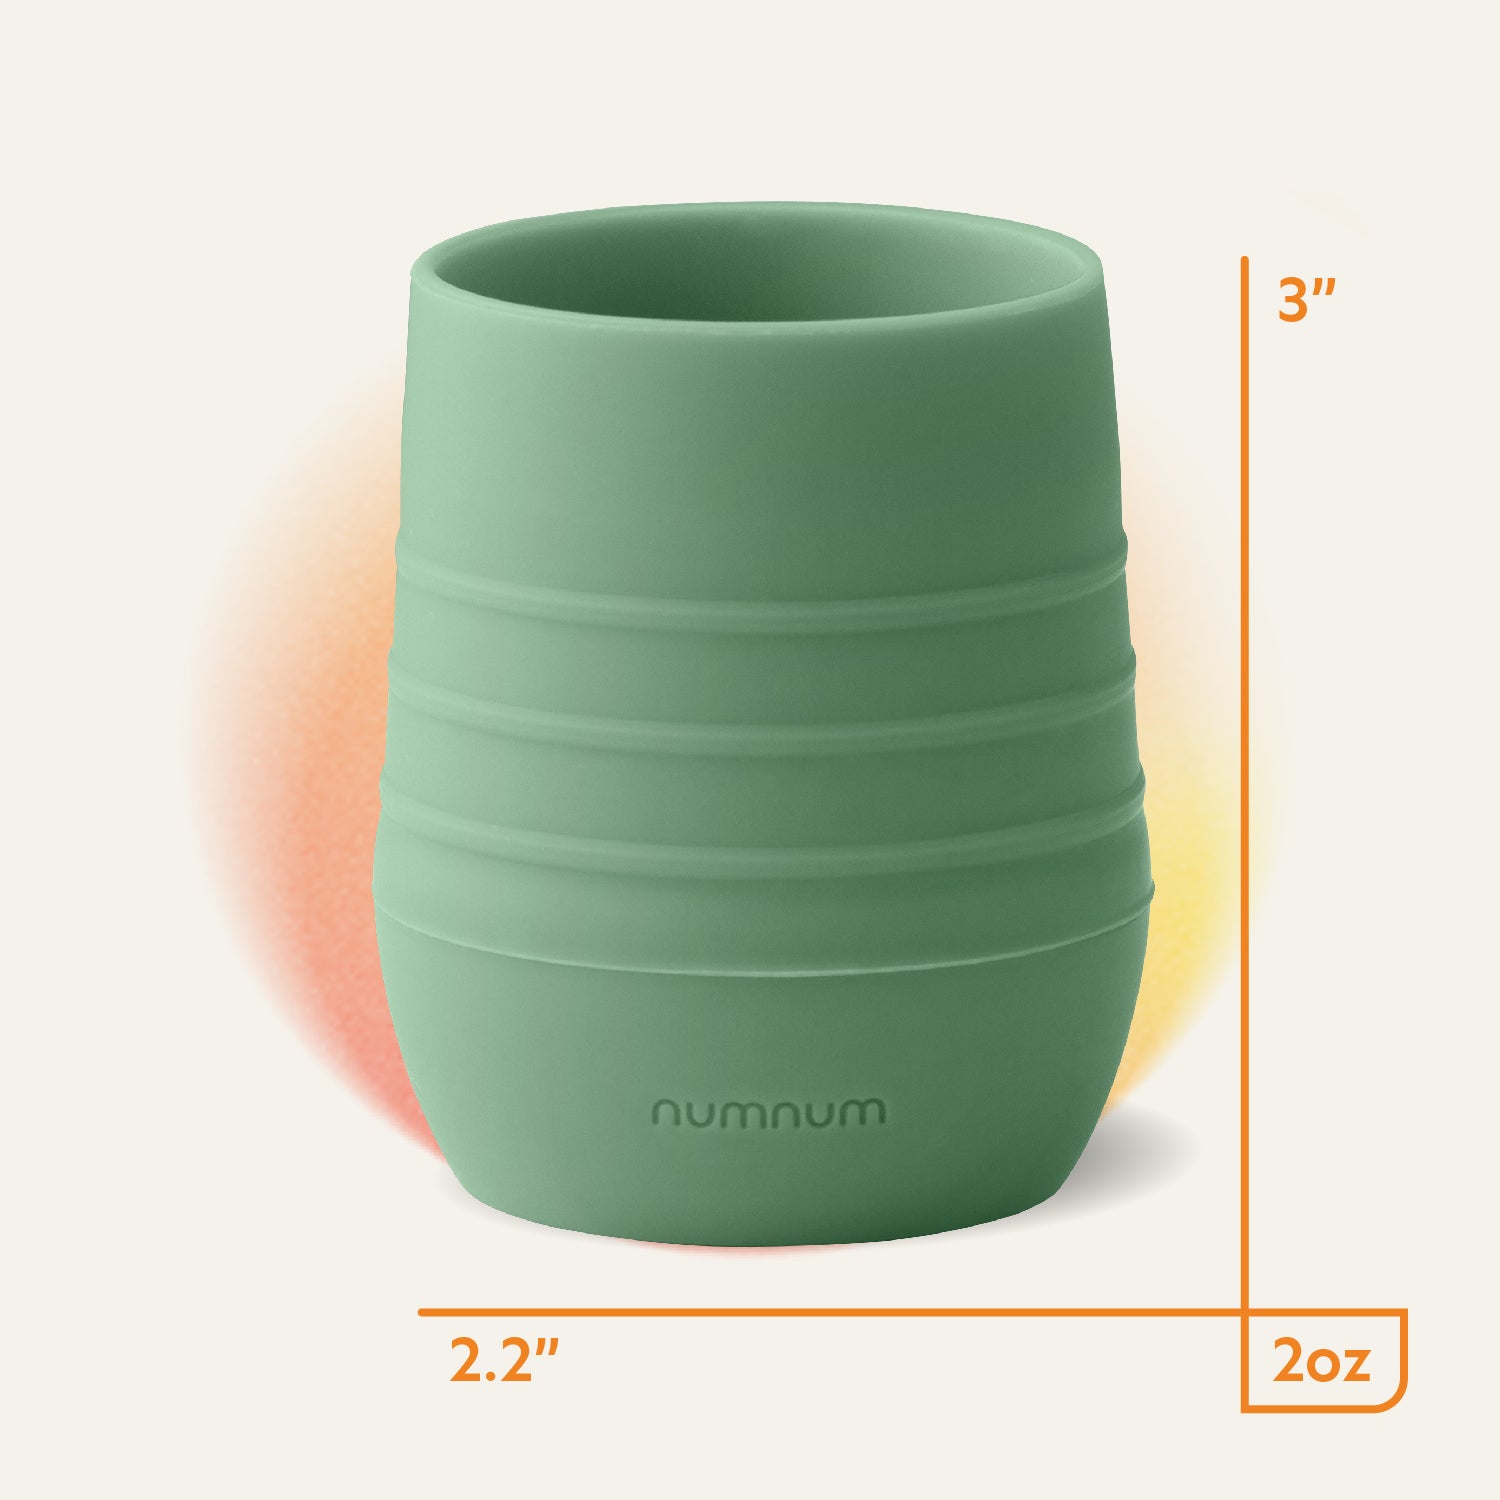 Transition Your Baby to a Cup with Our Silicone Learning Cup for Babies -  Nestor Avenue